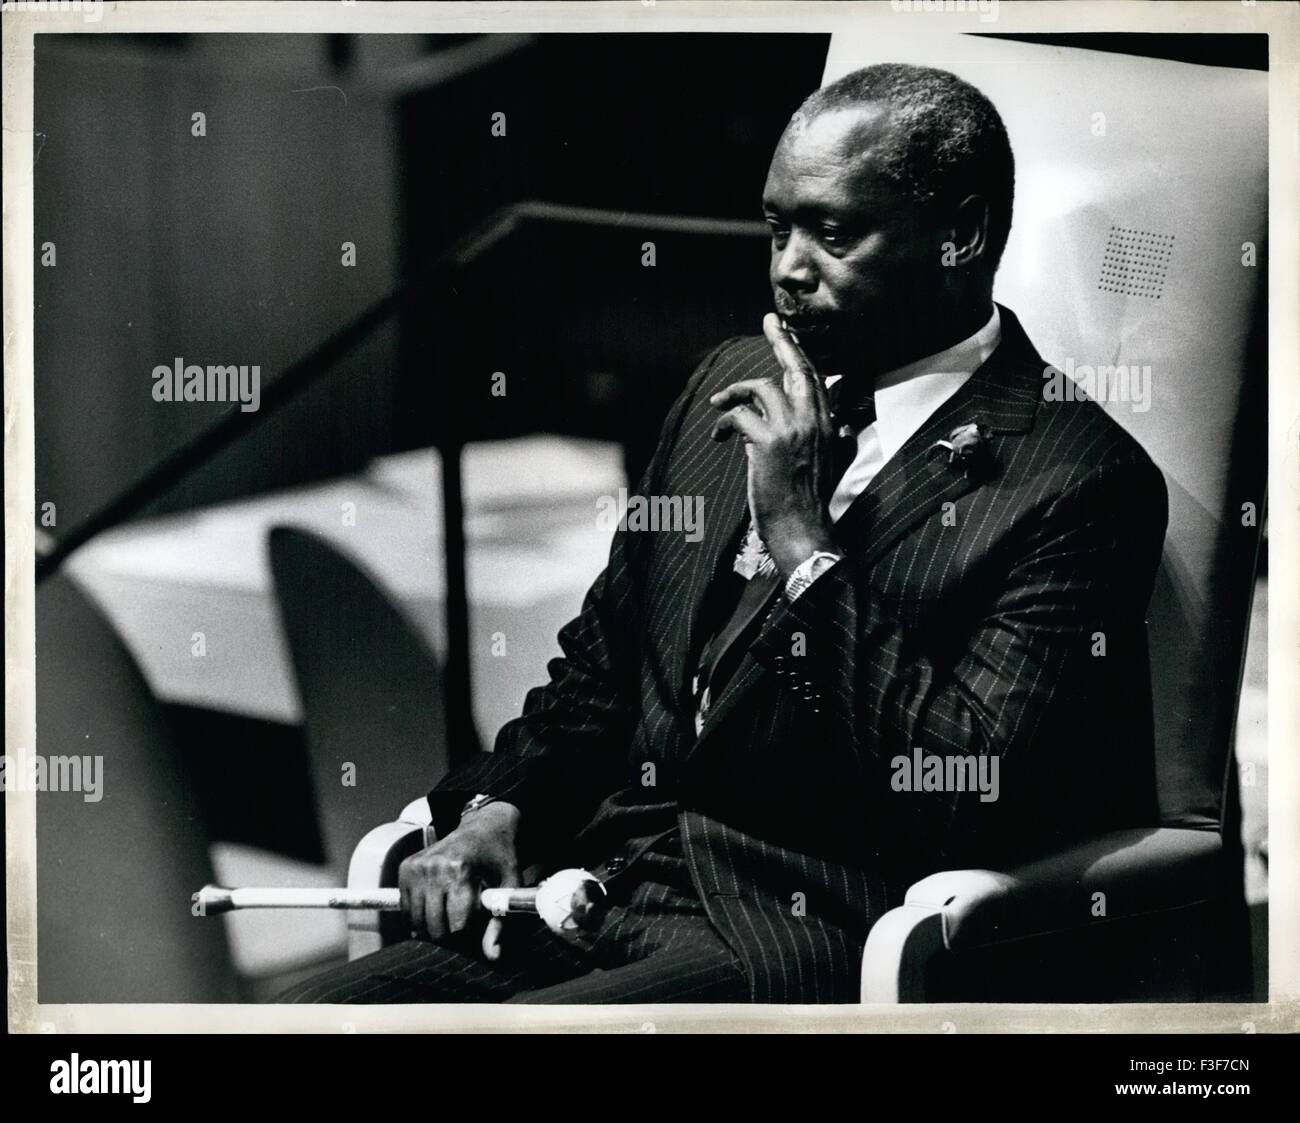 1981 - Fall 1981 The United Nations New York: The President of Kenya Mr. Daniel Arap Moi addressed the thirty sixth general assembly. © Keystone Pictures USA/ZUMAPRESS.com/Alamy Live News Stock Photo